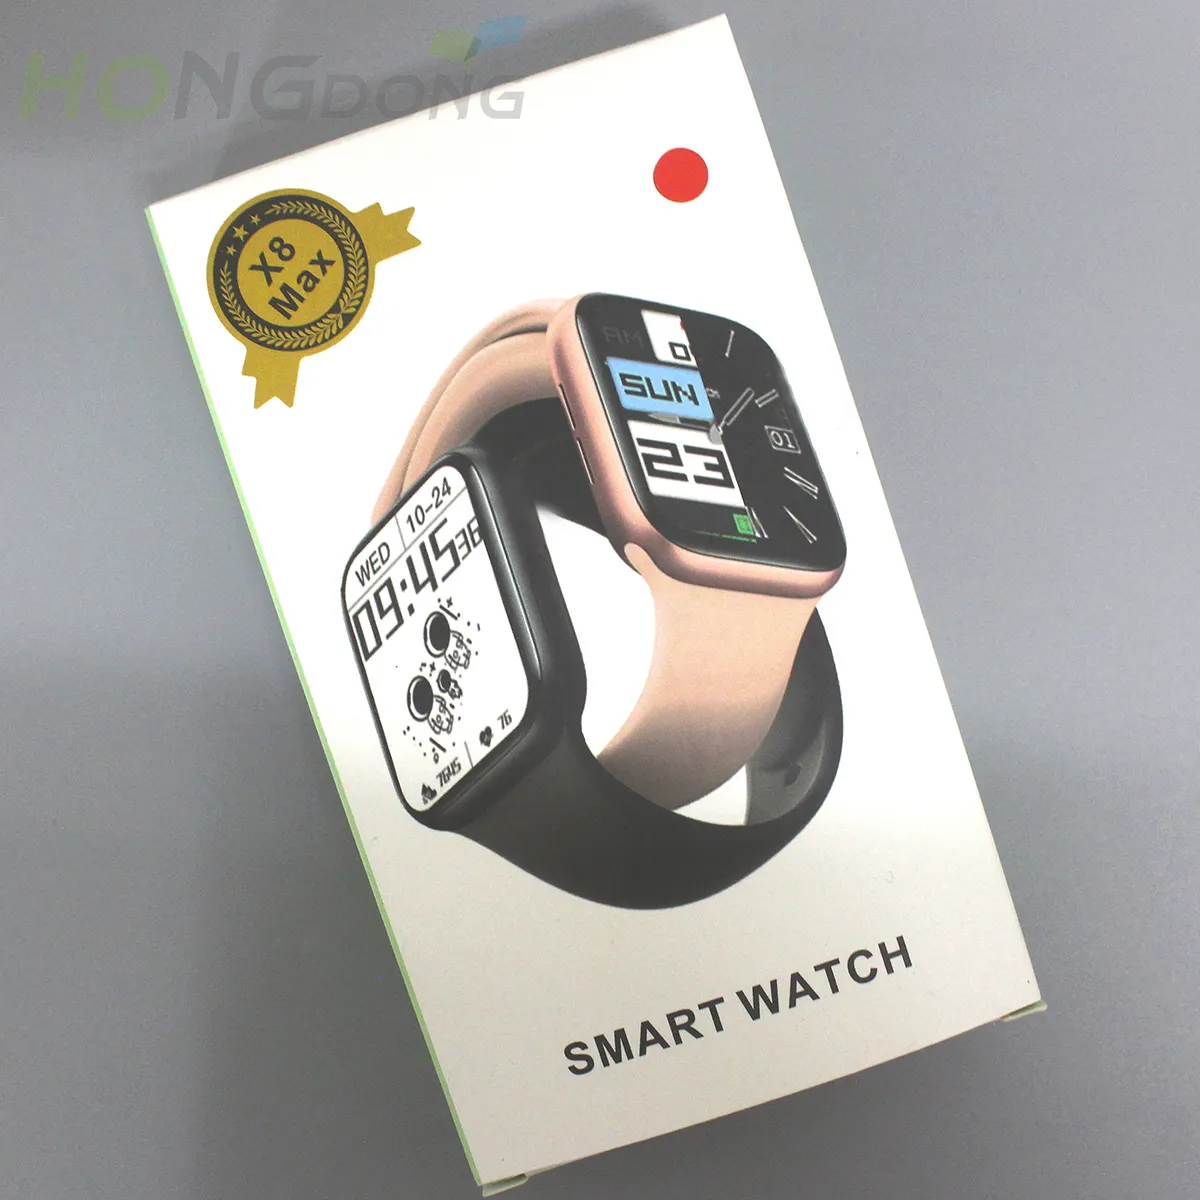 The New Listing Waterproof Touch Screen smart Watch X8 Max Pro 1.75 Inch Series 6 Android And Ios SmartWatch